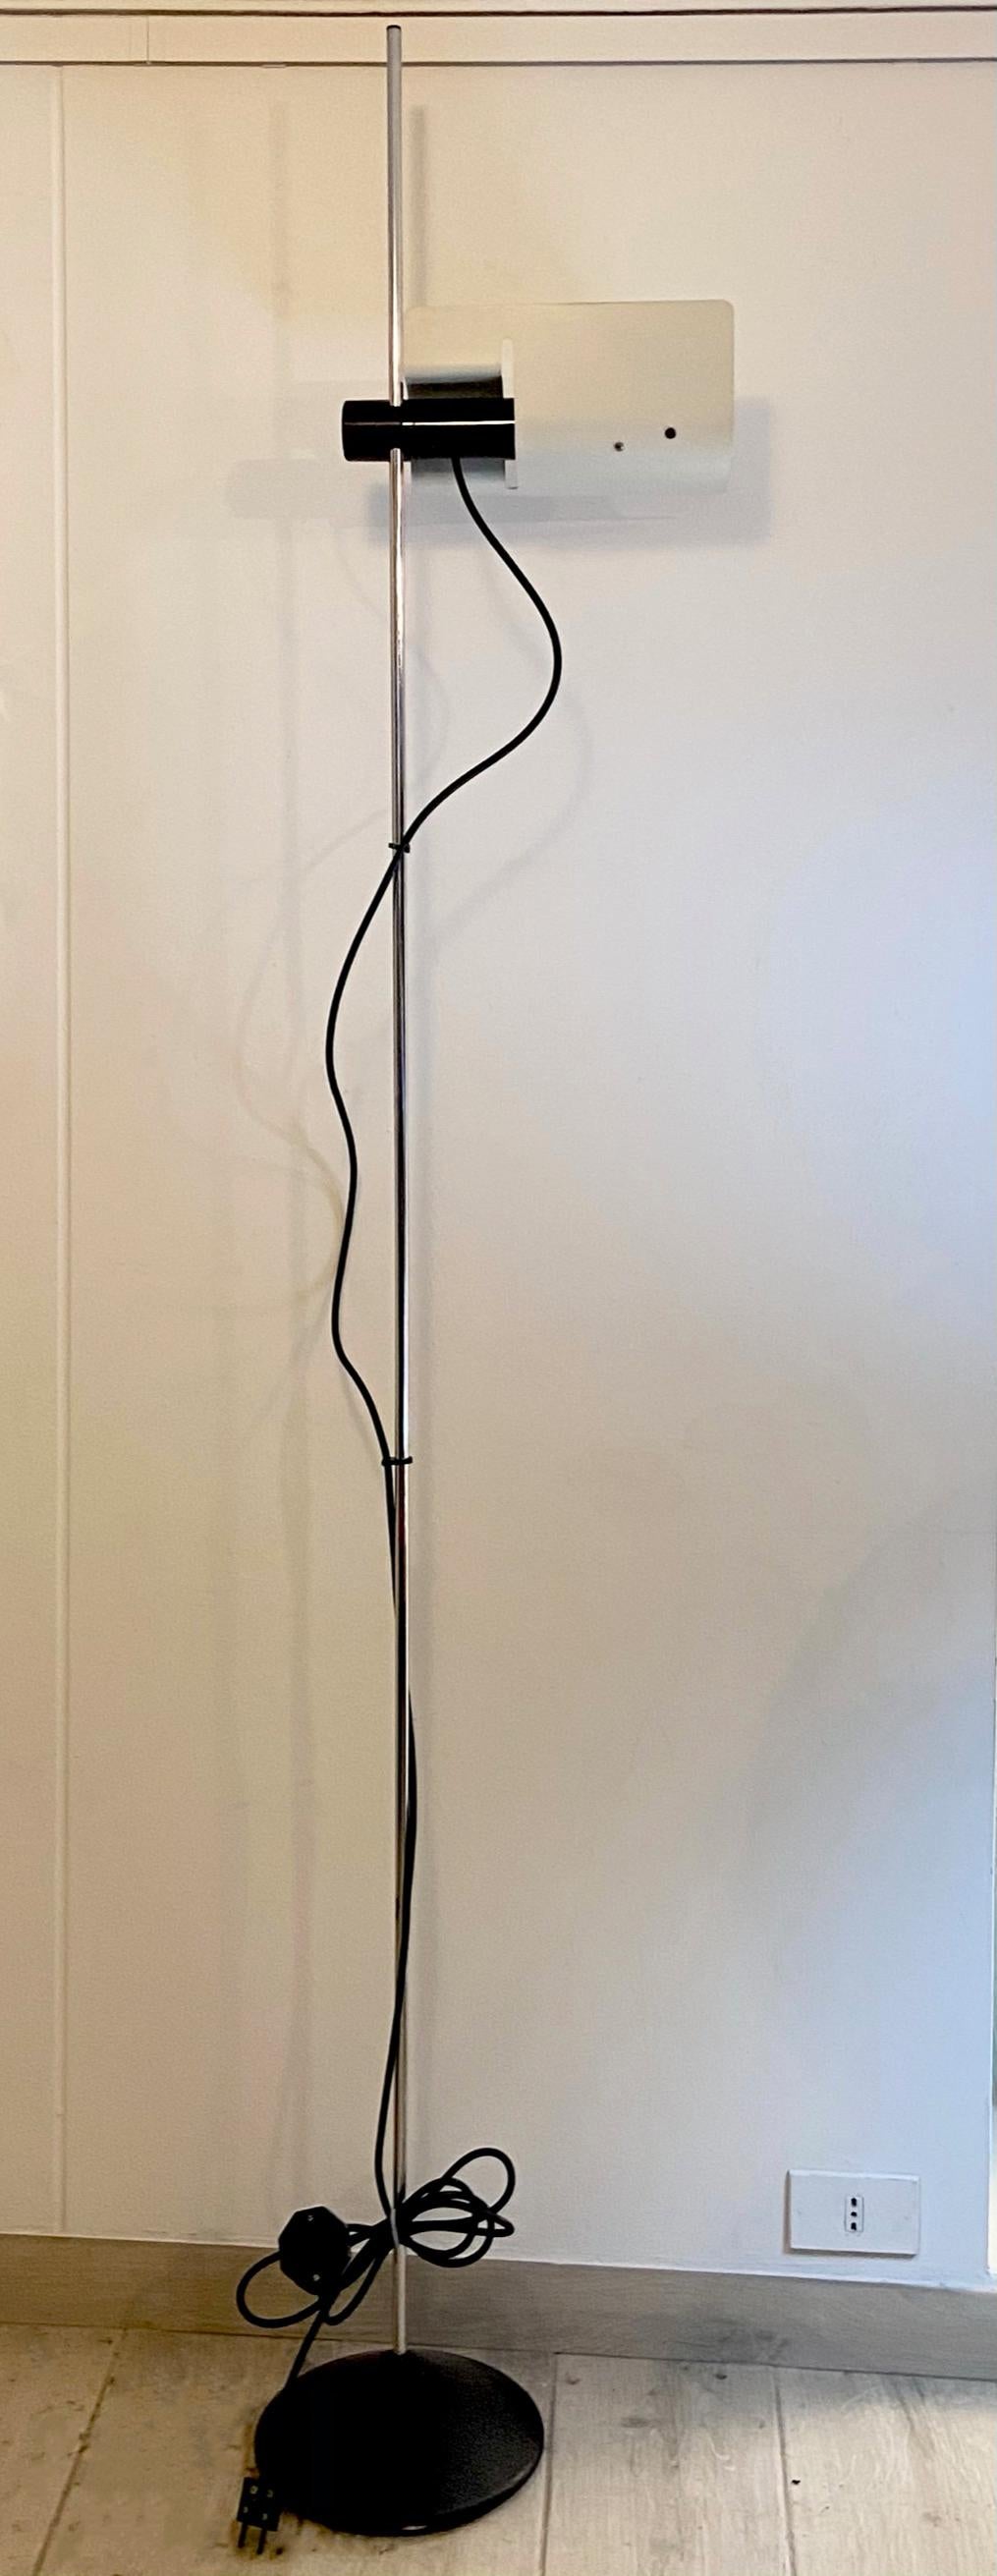 Rare floor lamp by Barbieri & Marianelli for Tronconi, 1970s
This very rare lamp is one of the first collaborations of the Italian architects Raul Barbieri and Giorgio Marianelli. It was produced by the lighting company Tronconi in the 1970s. It